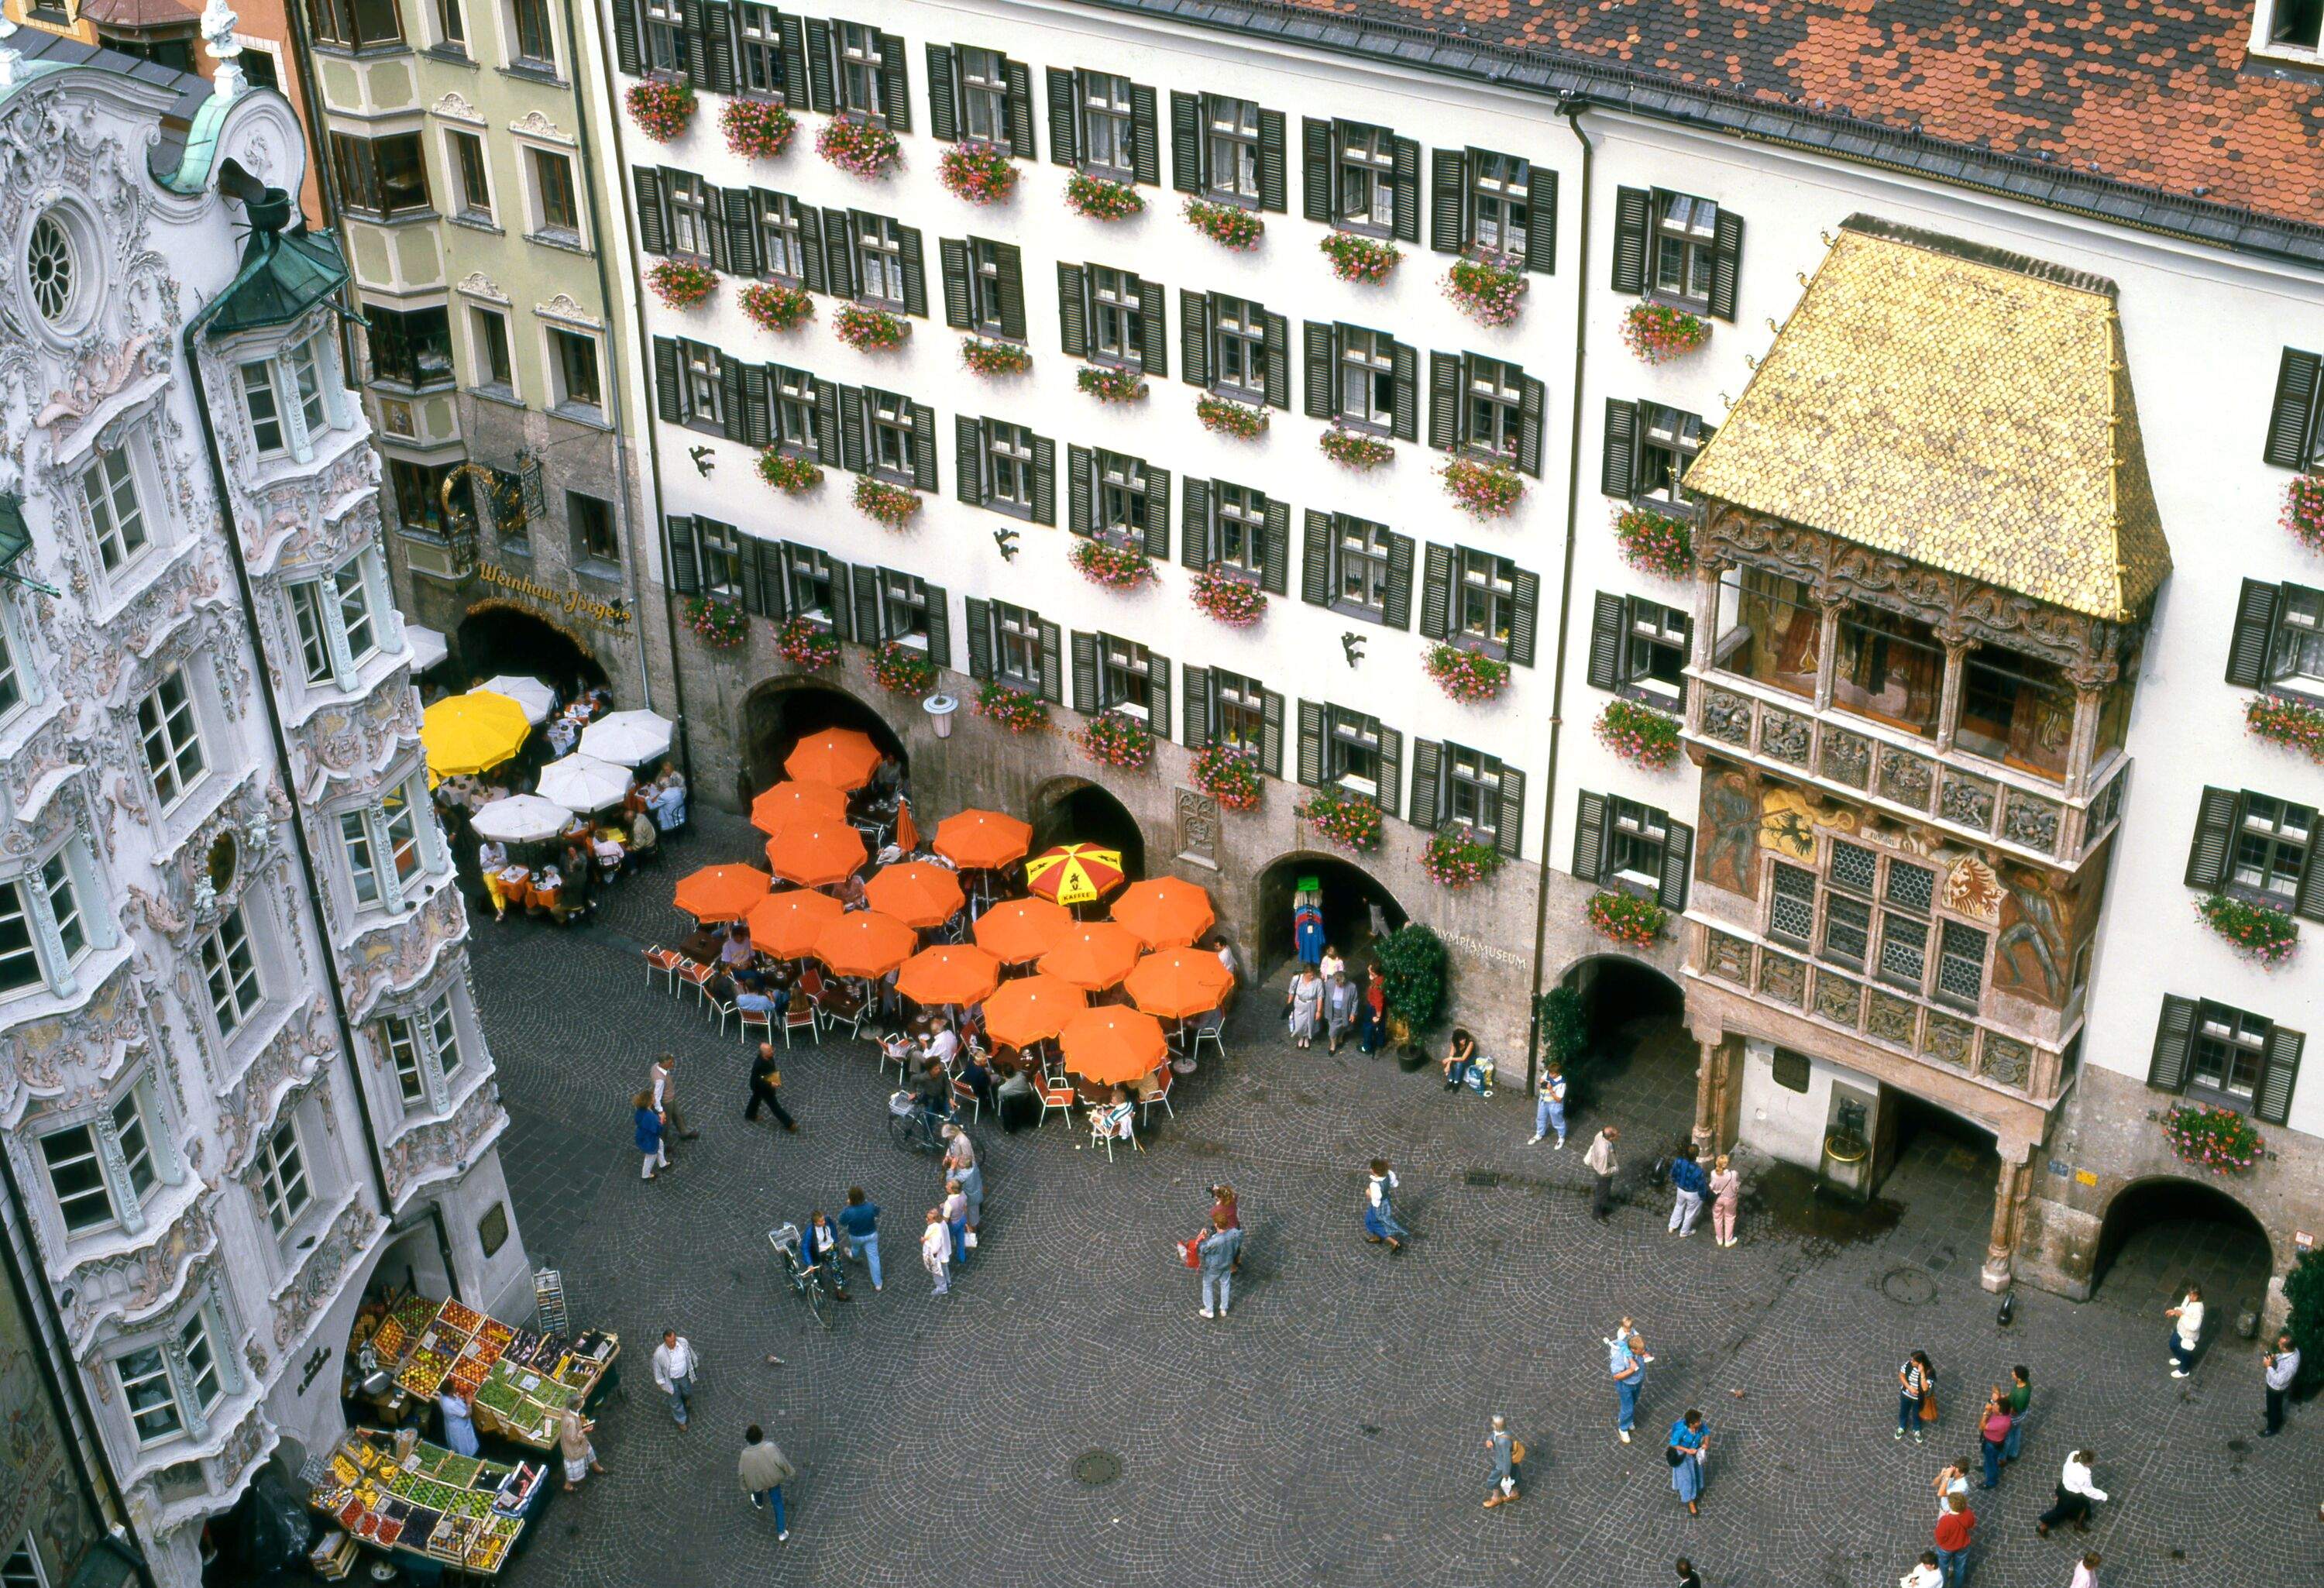 View from above of city centre of alpine city. People walking through a square, orange cafe with umbrellas and traditional architecture